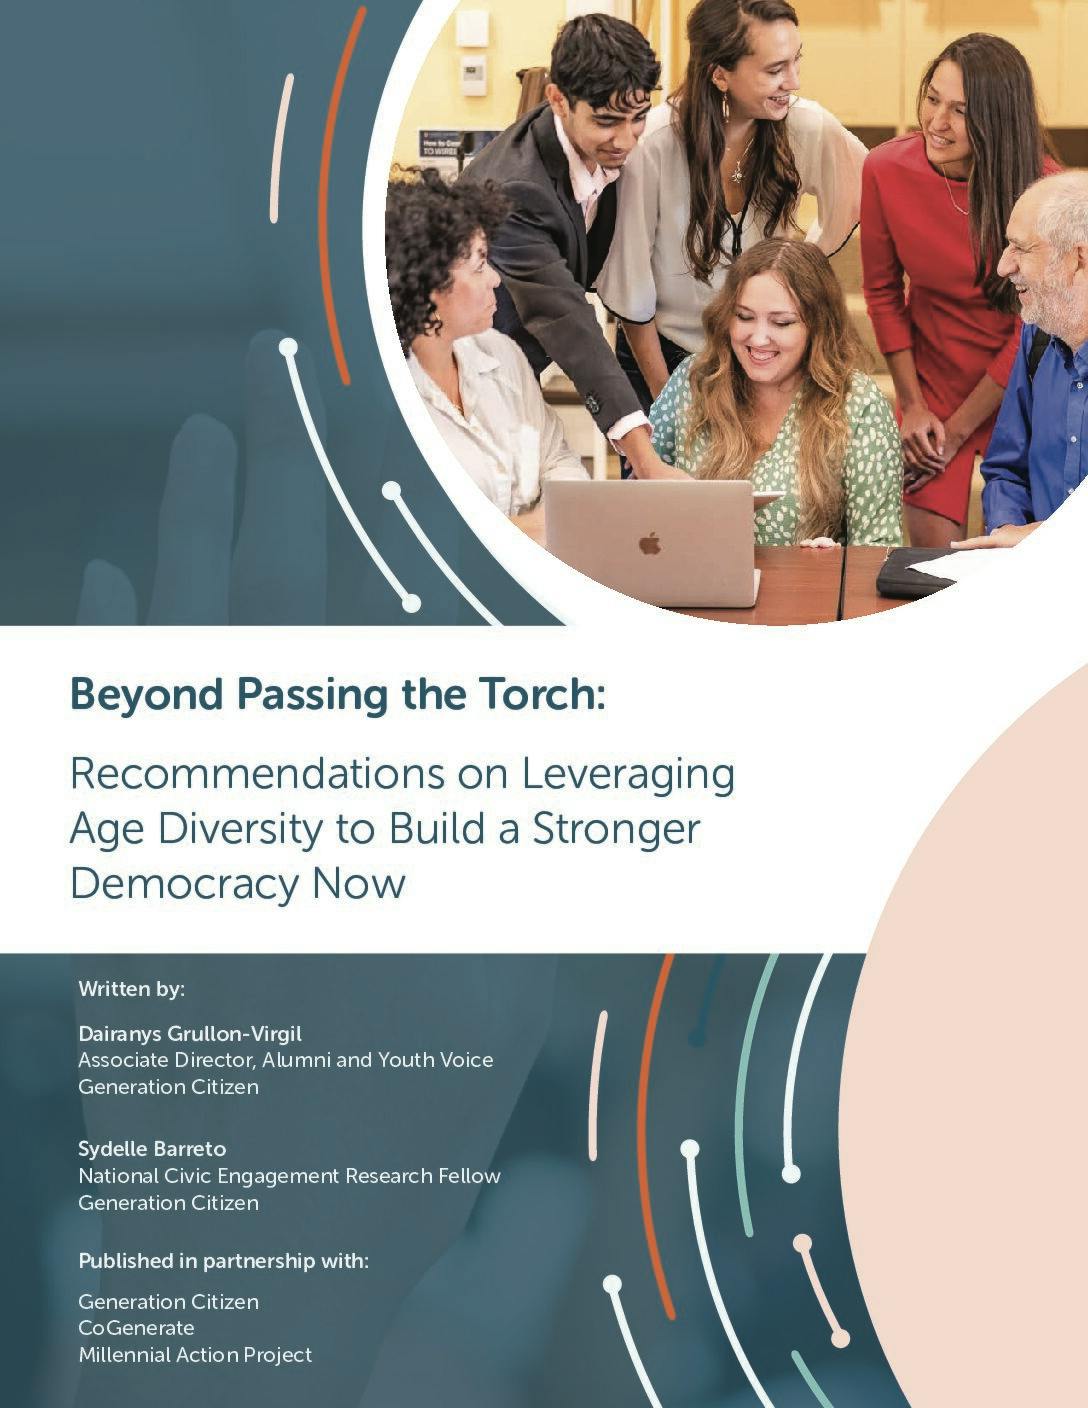 Beyond Passing the Torch: Recommendations on Leveraging Age Diversity to Build a Stronger Democracy Now